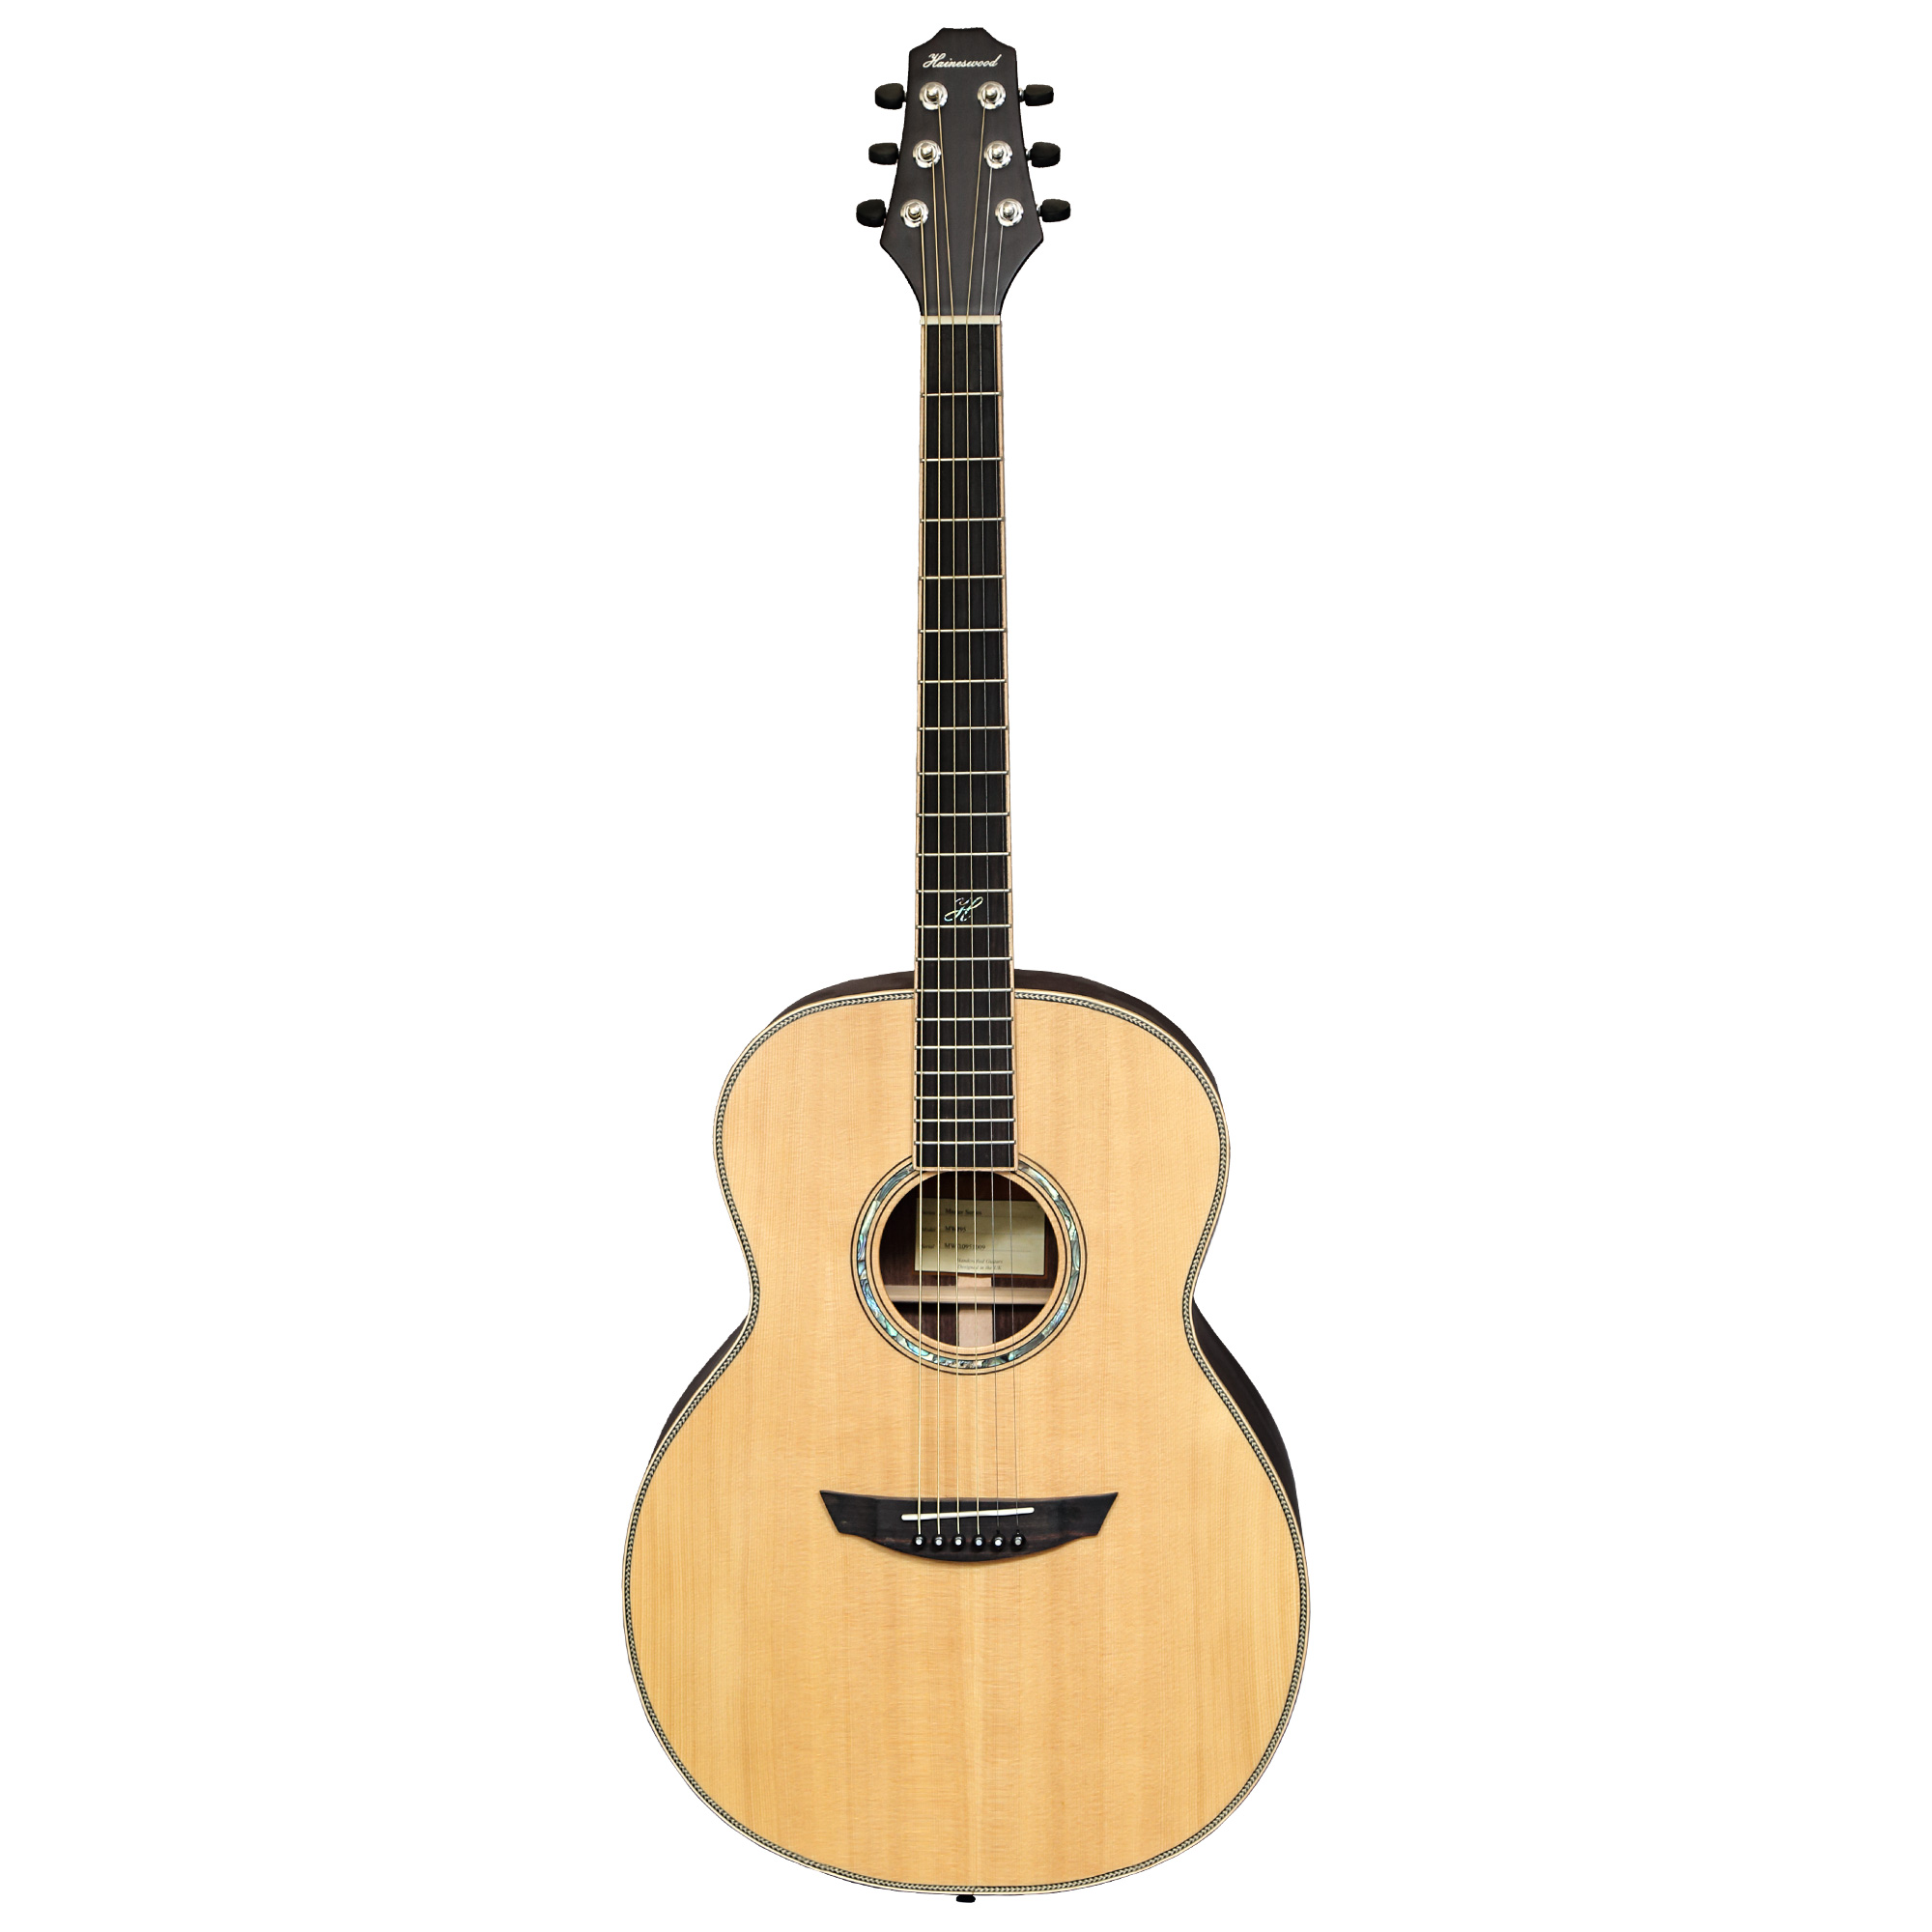 Haineswood Masterworks MWD95 Dreadnought